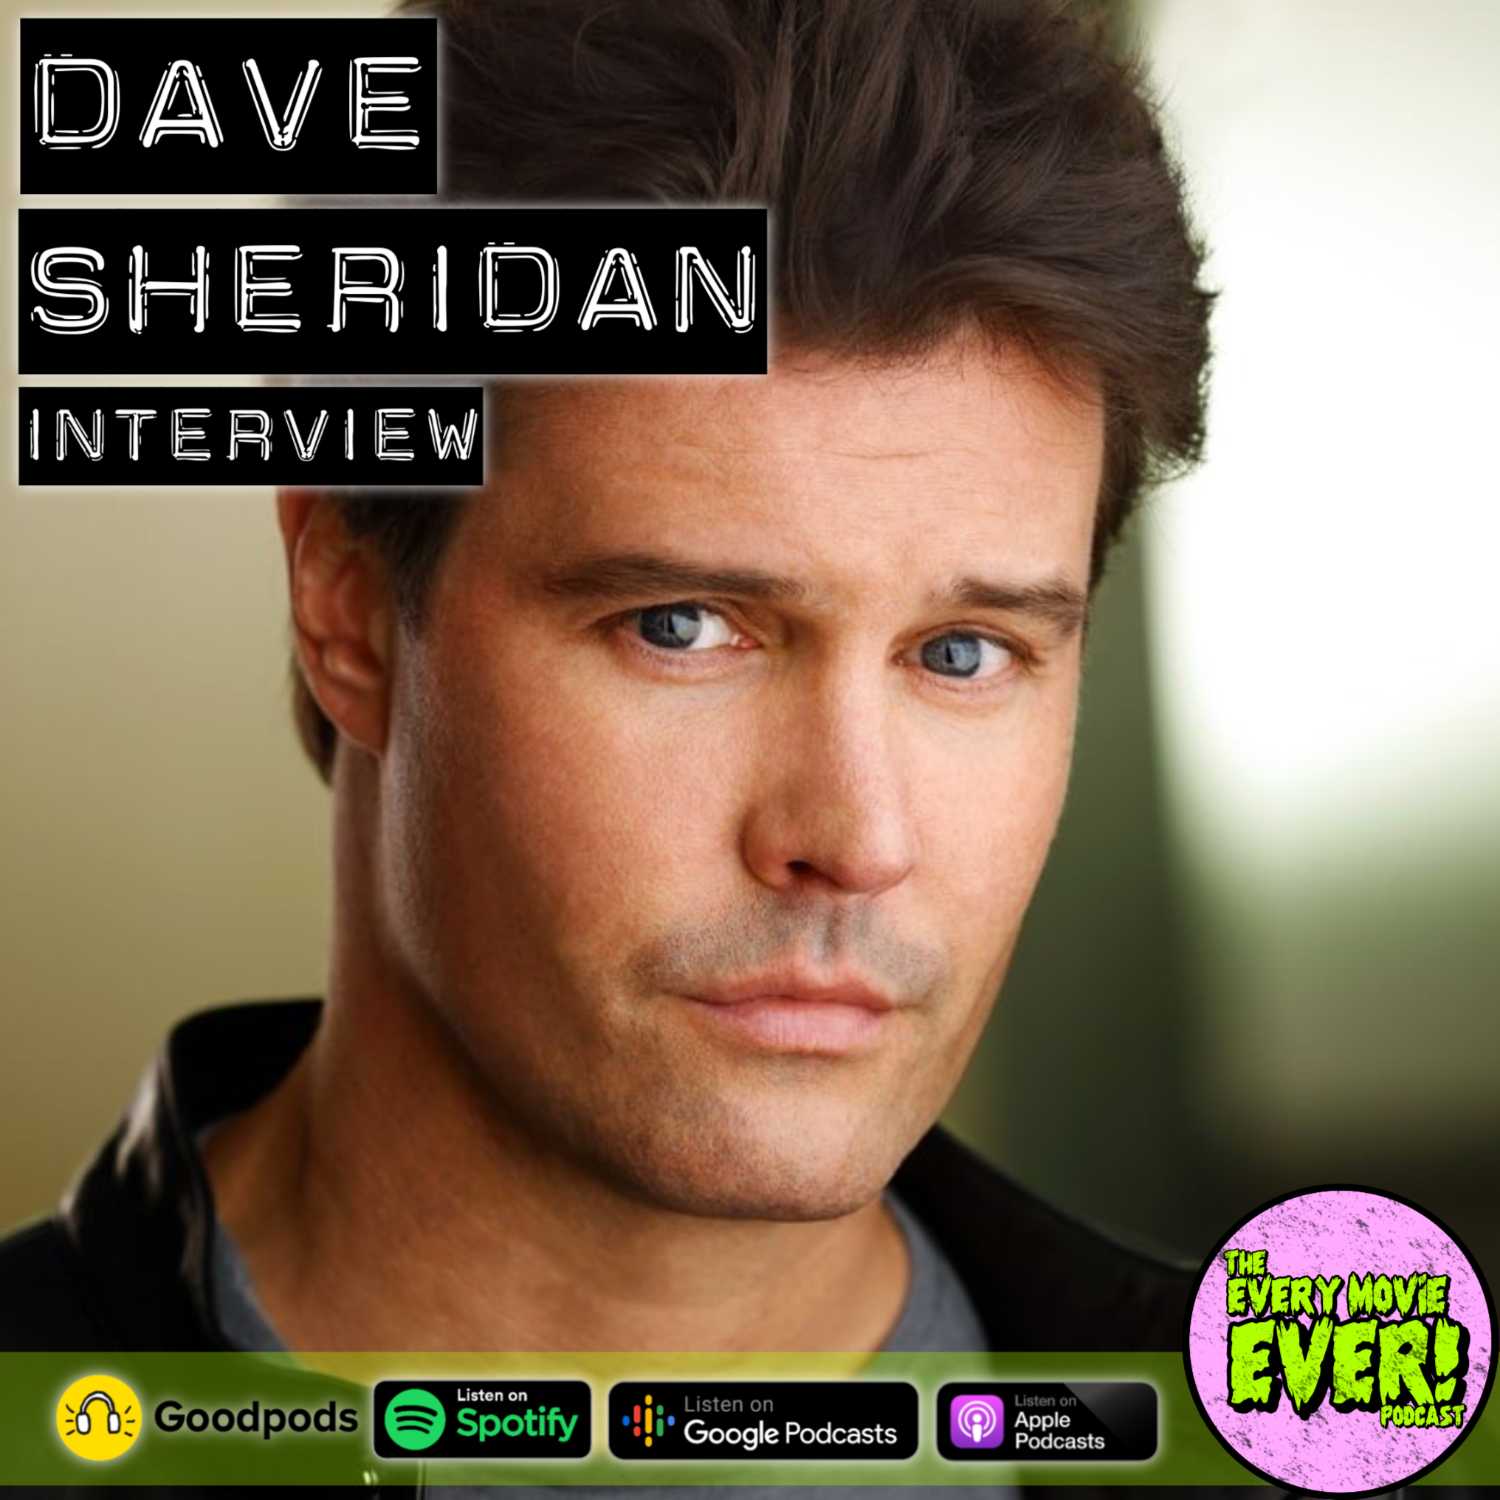 INTERVIEW! Dave Sheridan talks Scary Movie, Buzzkill, Saturday Night Live, Christmas Tapes and more!